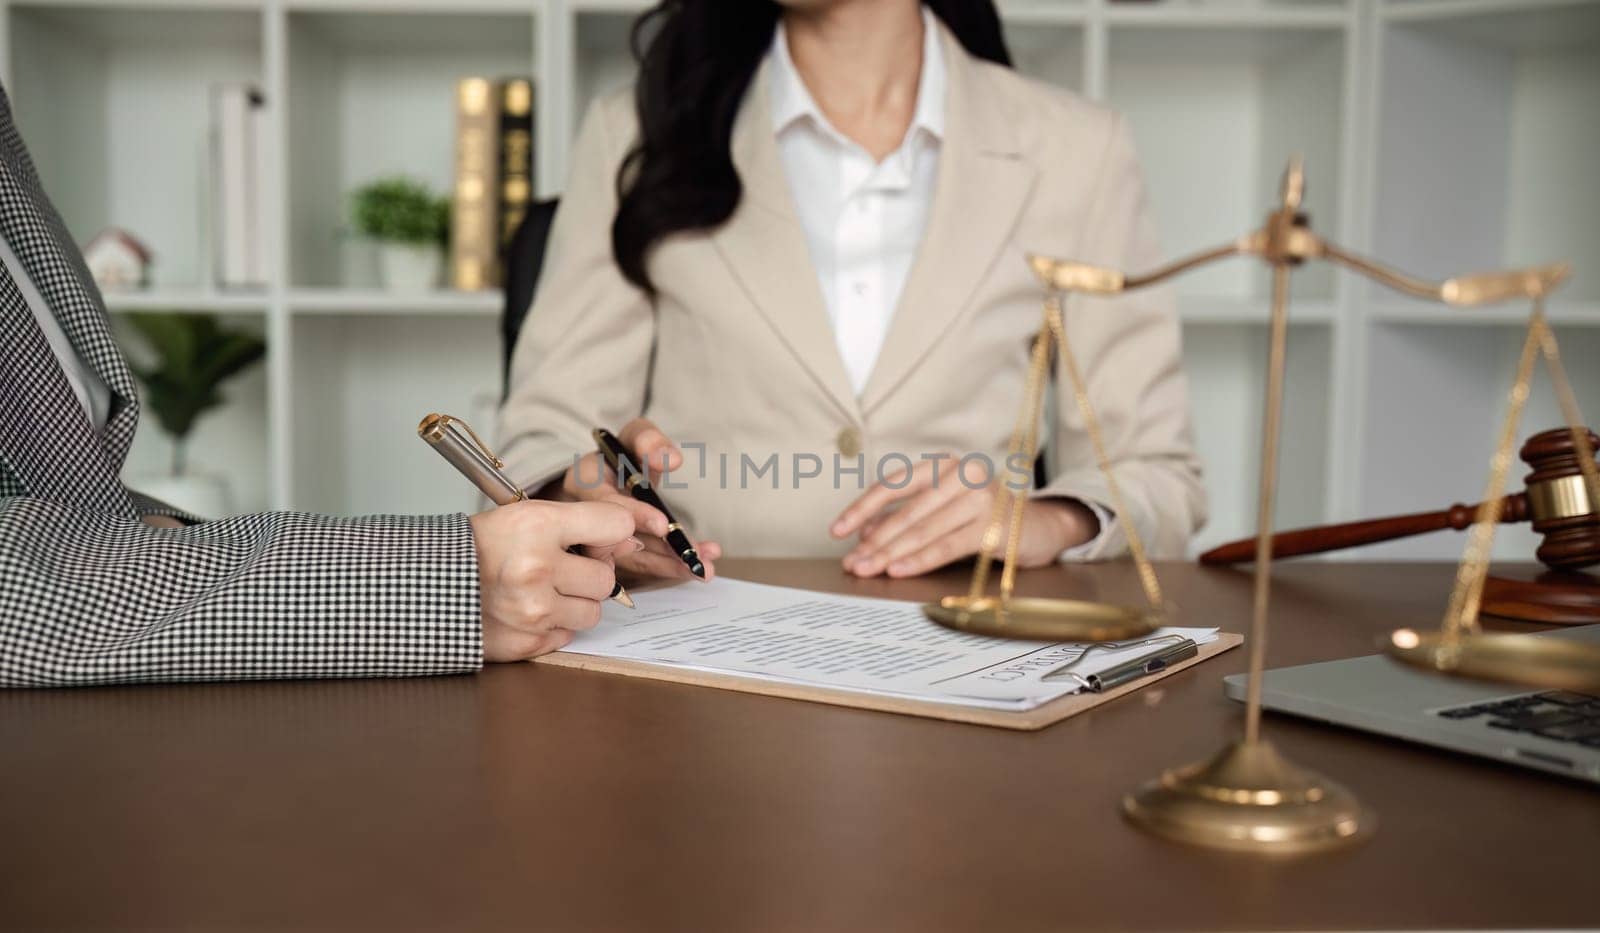 Lawyer and businesswomen discussing and introducing Providing legal advice regarding signing insurance contracts or financial contracts.